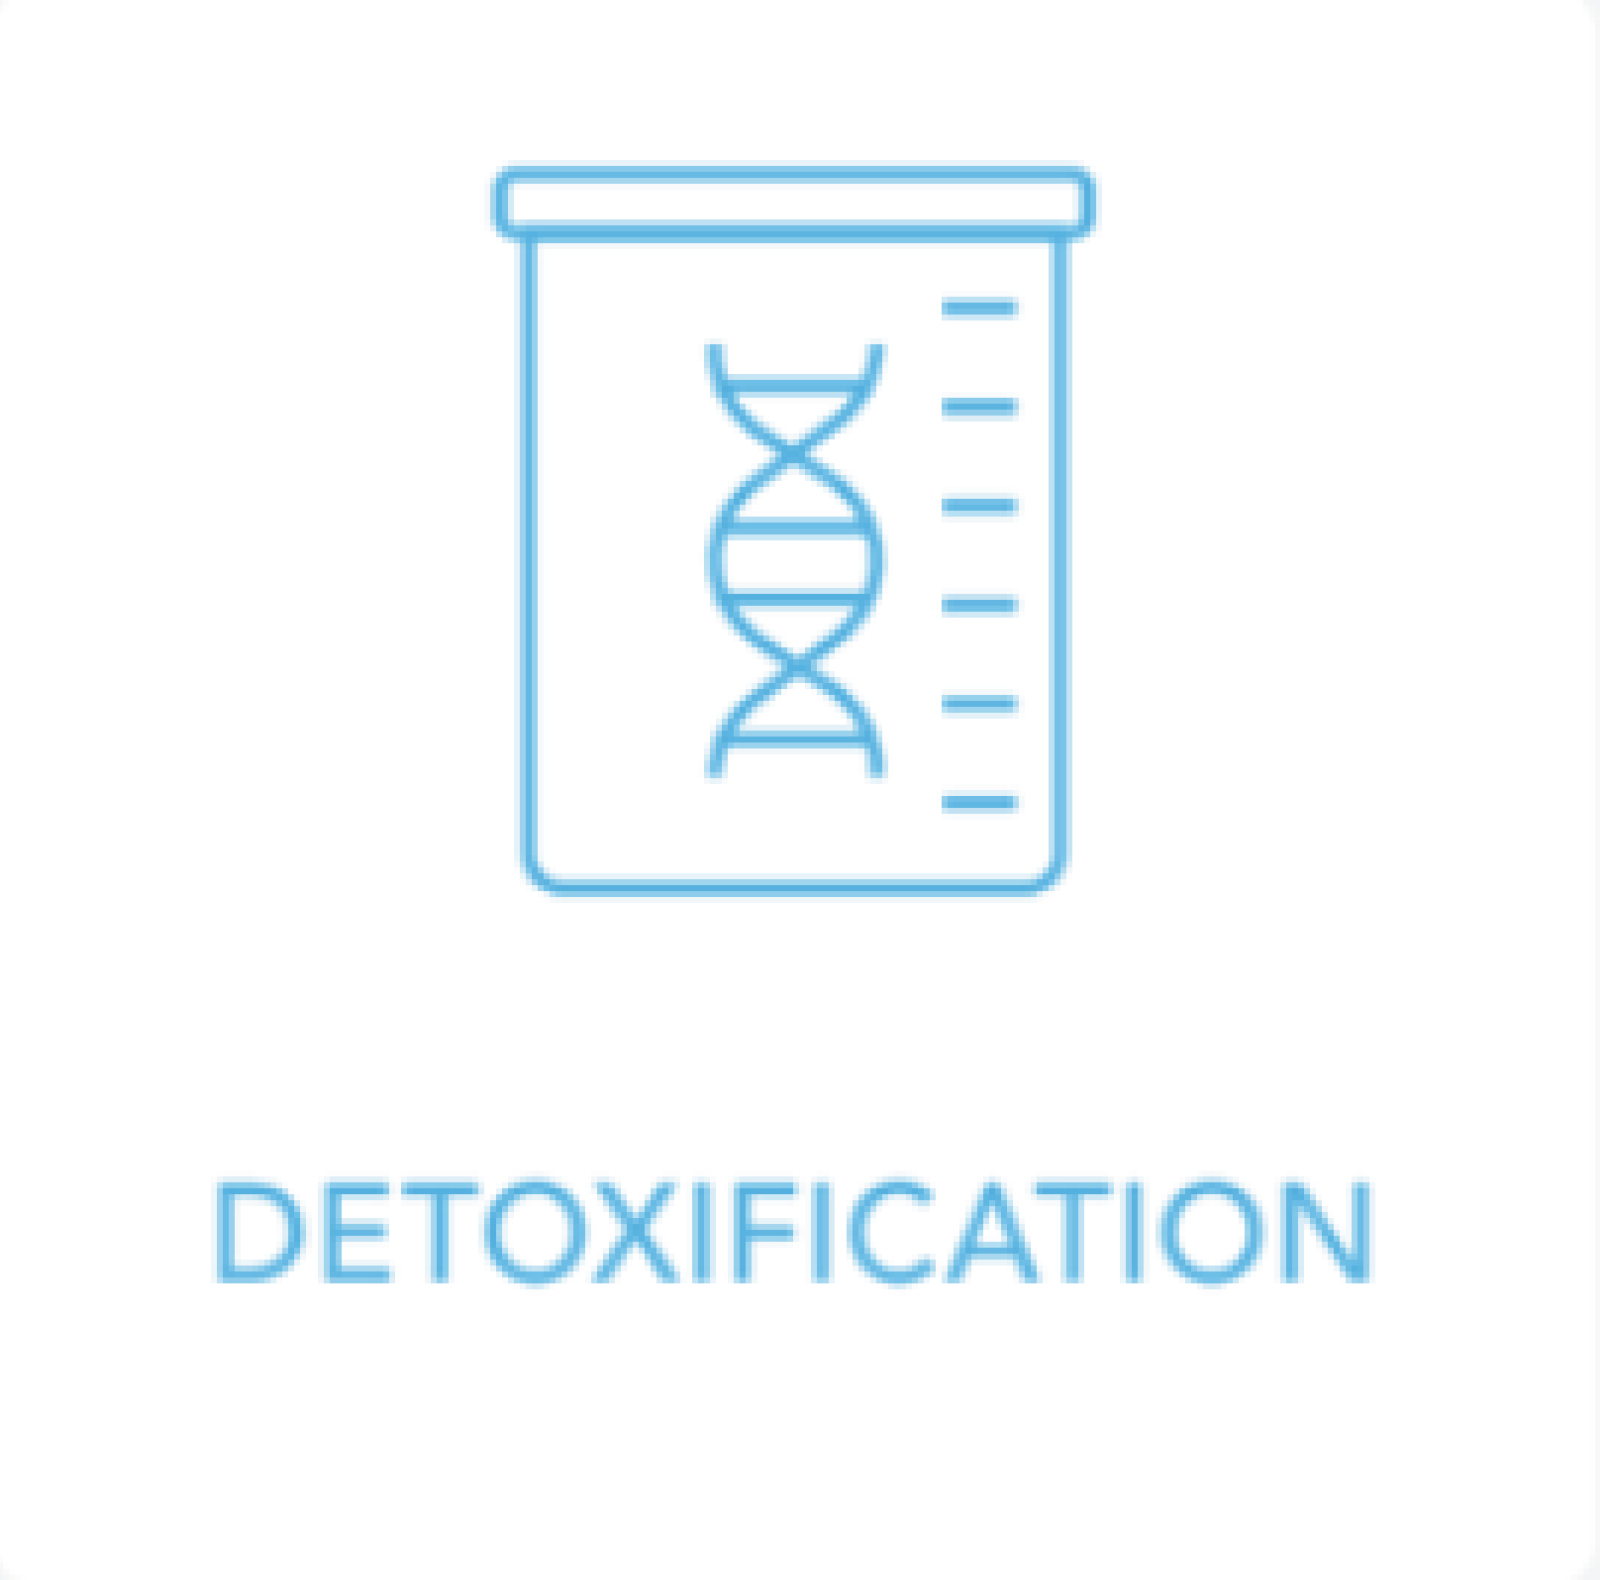 A blue icon with the word detoxification written in it.